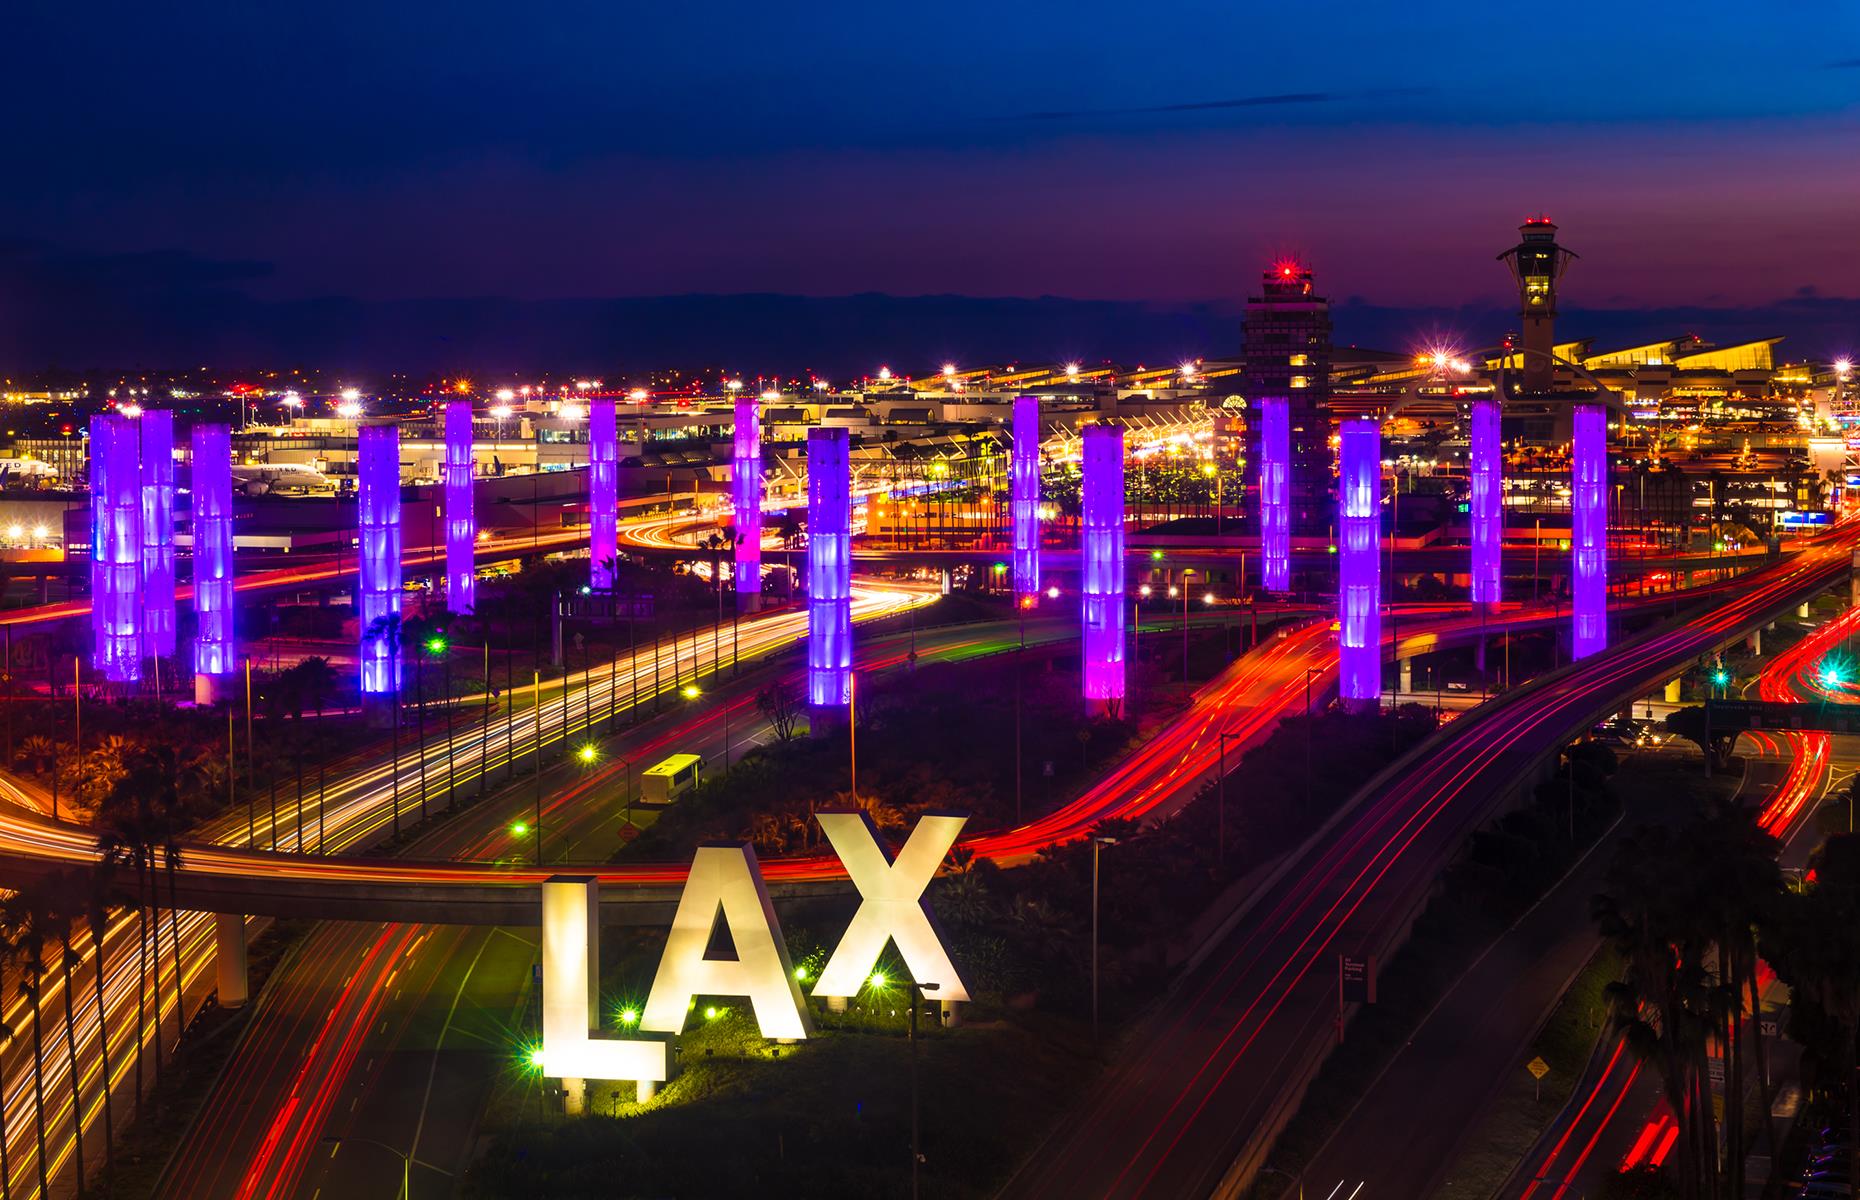 <p>Los Angeles International Airport, or LAX for short, handled a record 88.1 million passengers in 2019, with the most popular destinations being Guadalajara, Mexico, London Heathrow and Paris Charles de Gaulle. A score of just 763 out of 1,000 is due to long waits and difficulties in moving between the nine terminals. Hopefully this will be eased when the connecting LAX train system is finished, a $4 billion project which is currently pegged for completion in 2023.</p>